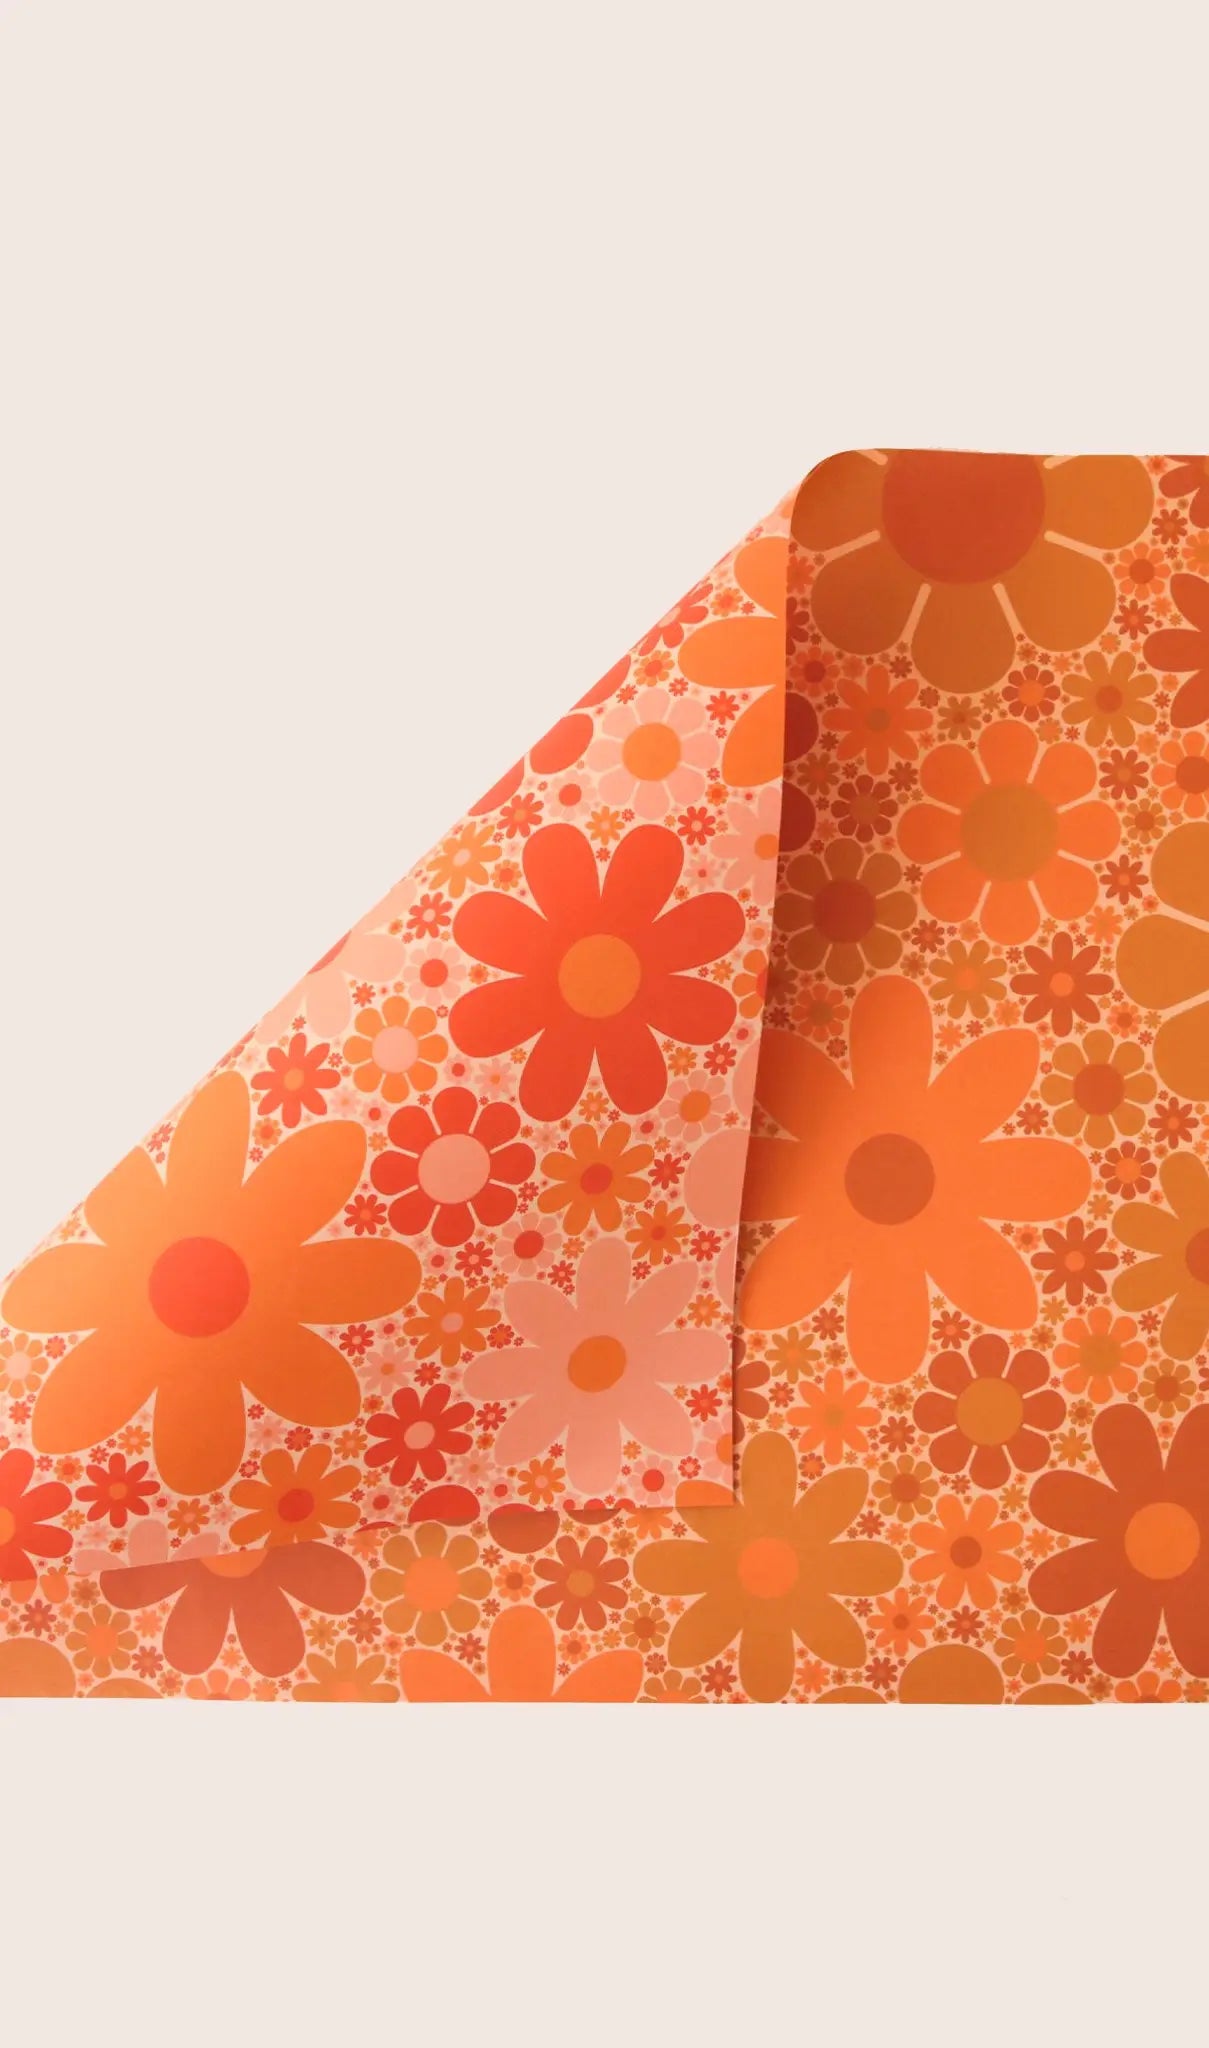 70s floral gift wrap by Sunshine Studios